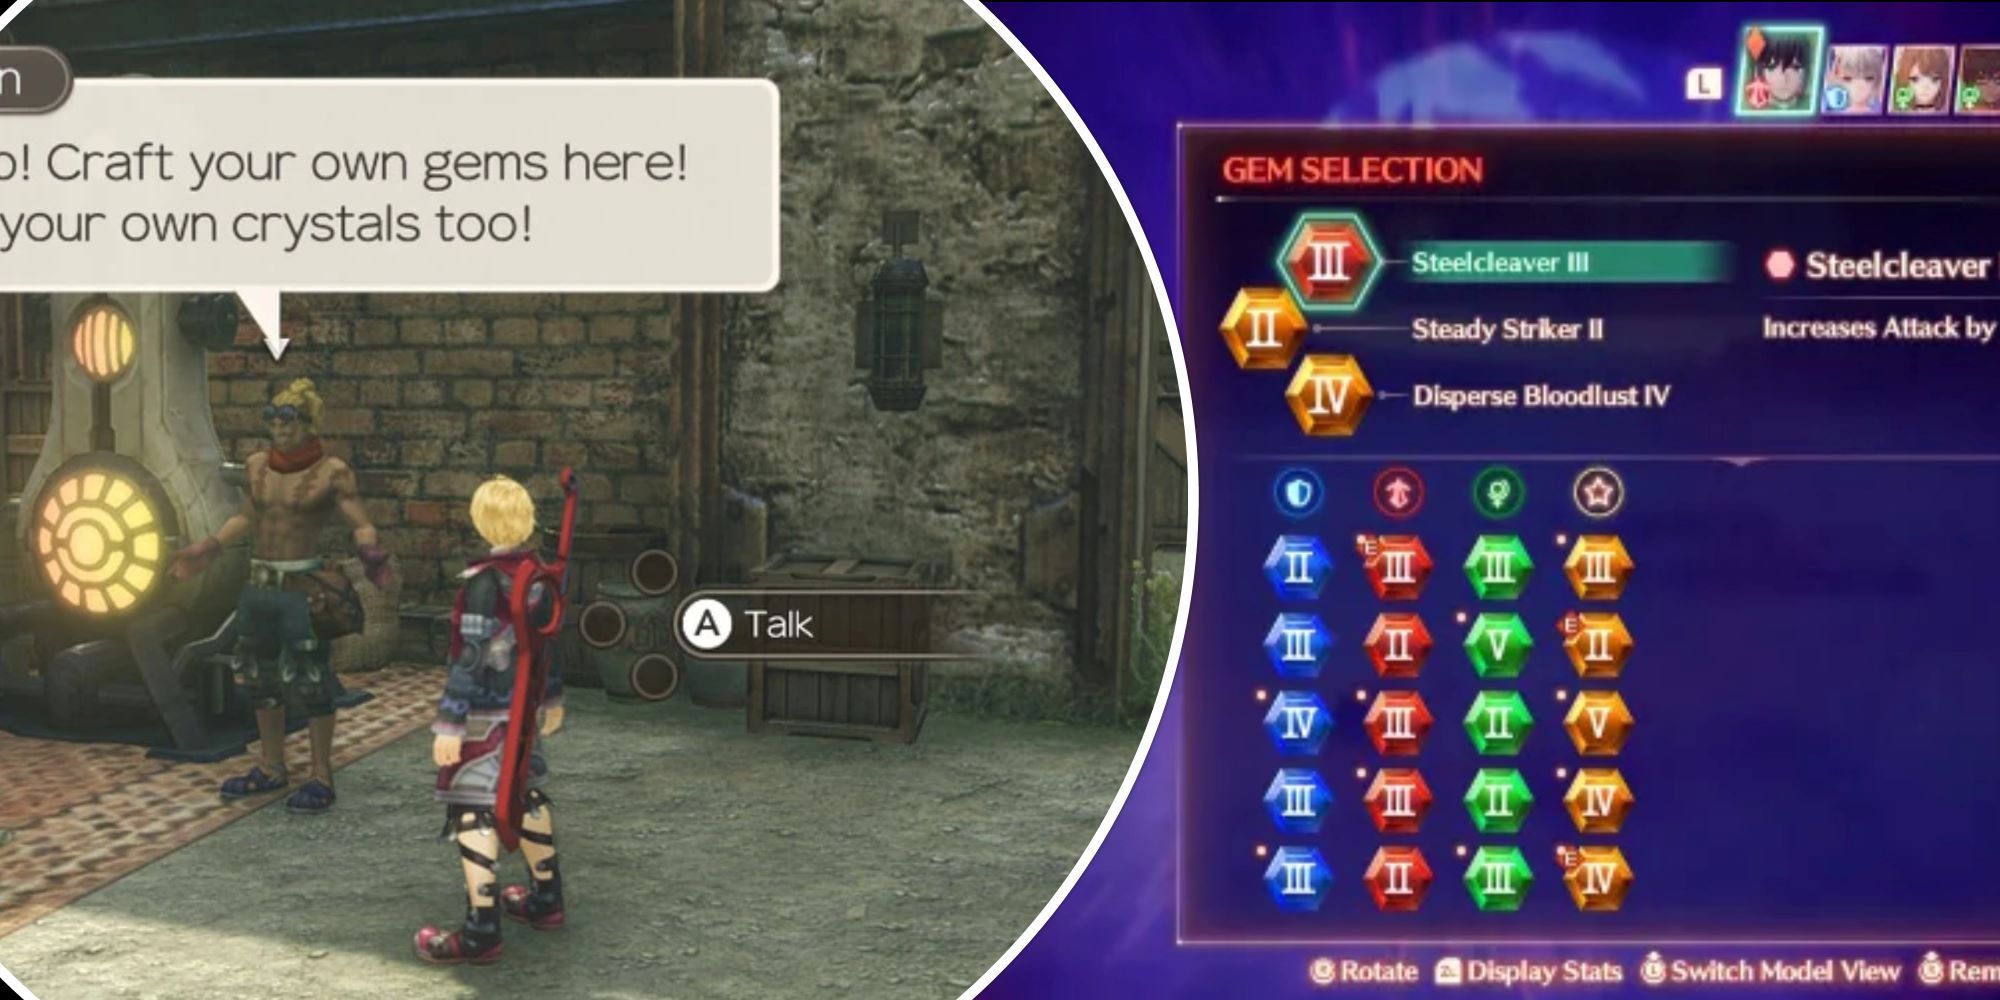 Xenoblade Chronicles 3: Future Redeemed split image Gem crafting station and Steelcleaver Gem in status menu